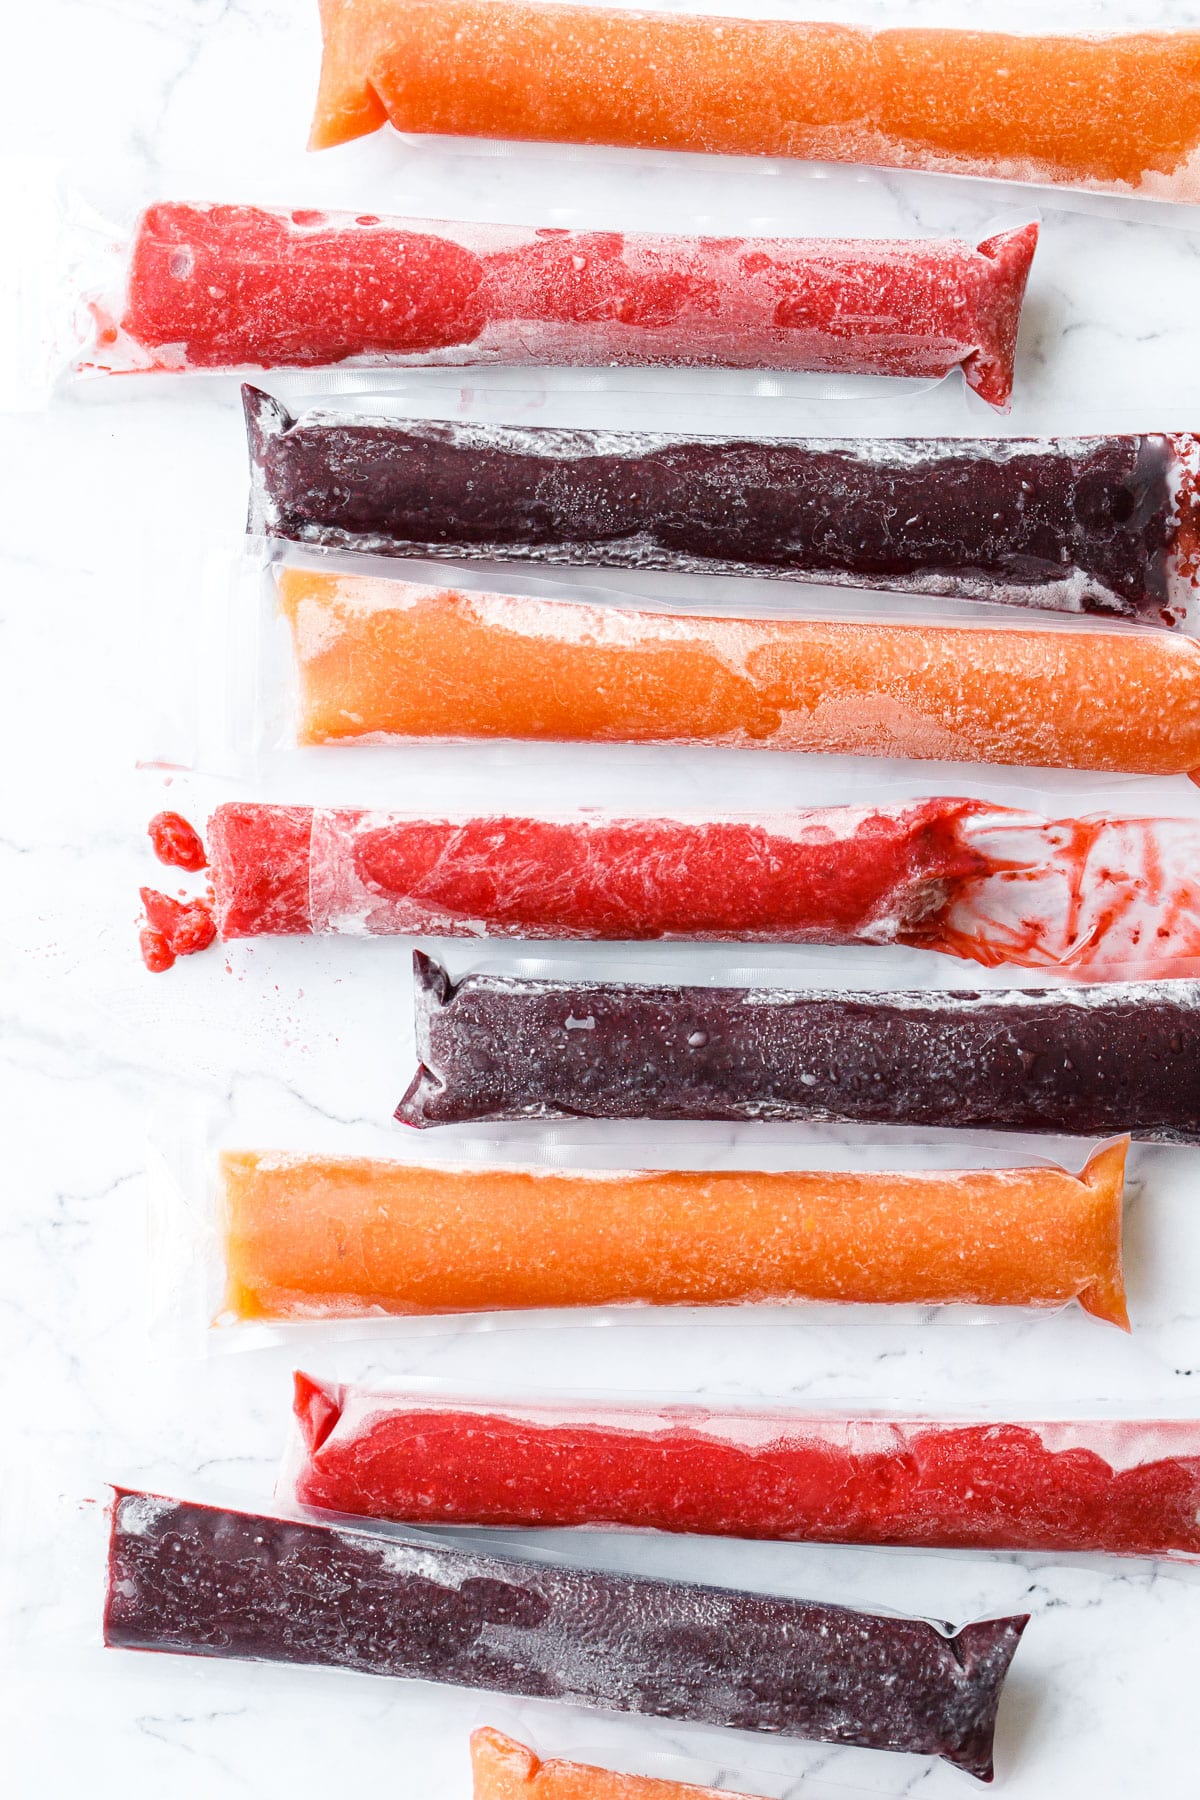 Overhead, row of alternating colors of peach, blueberry, and strawberry freezer jam ice pops, one with a bite out of it to show texture.